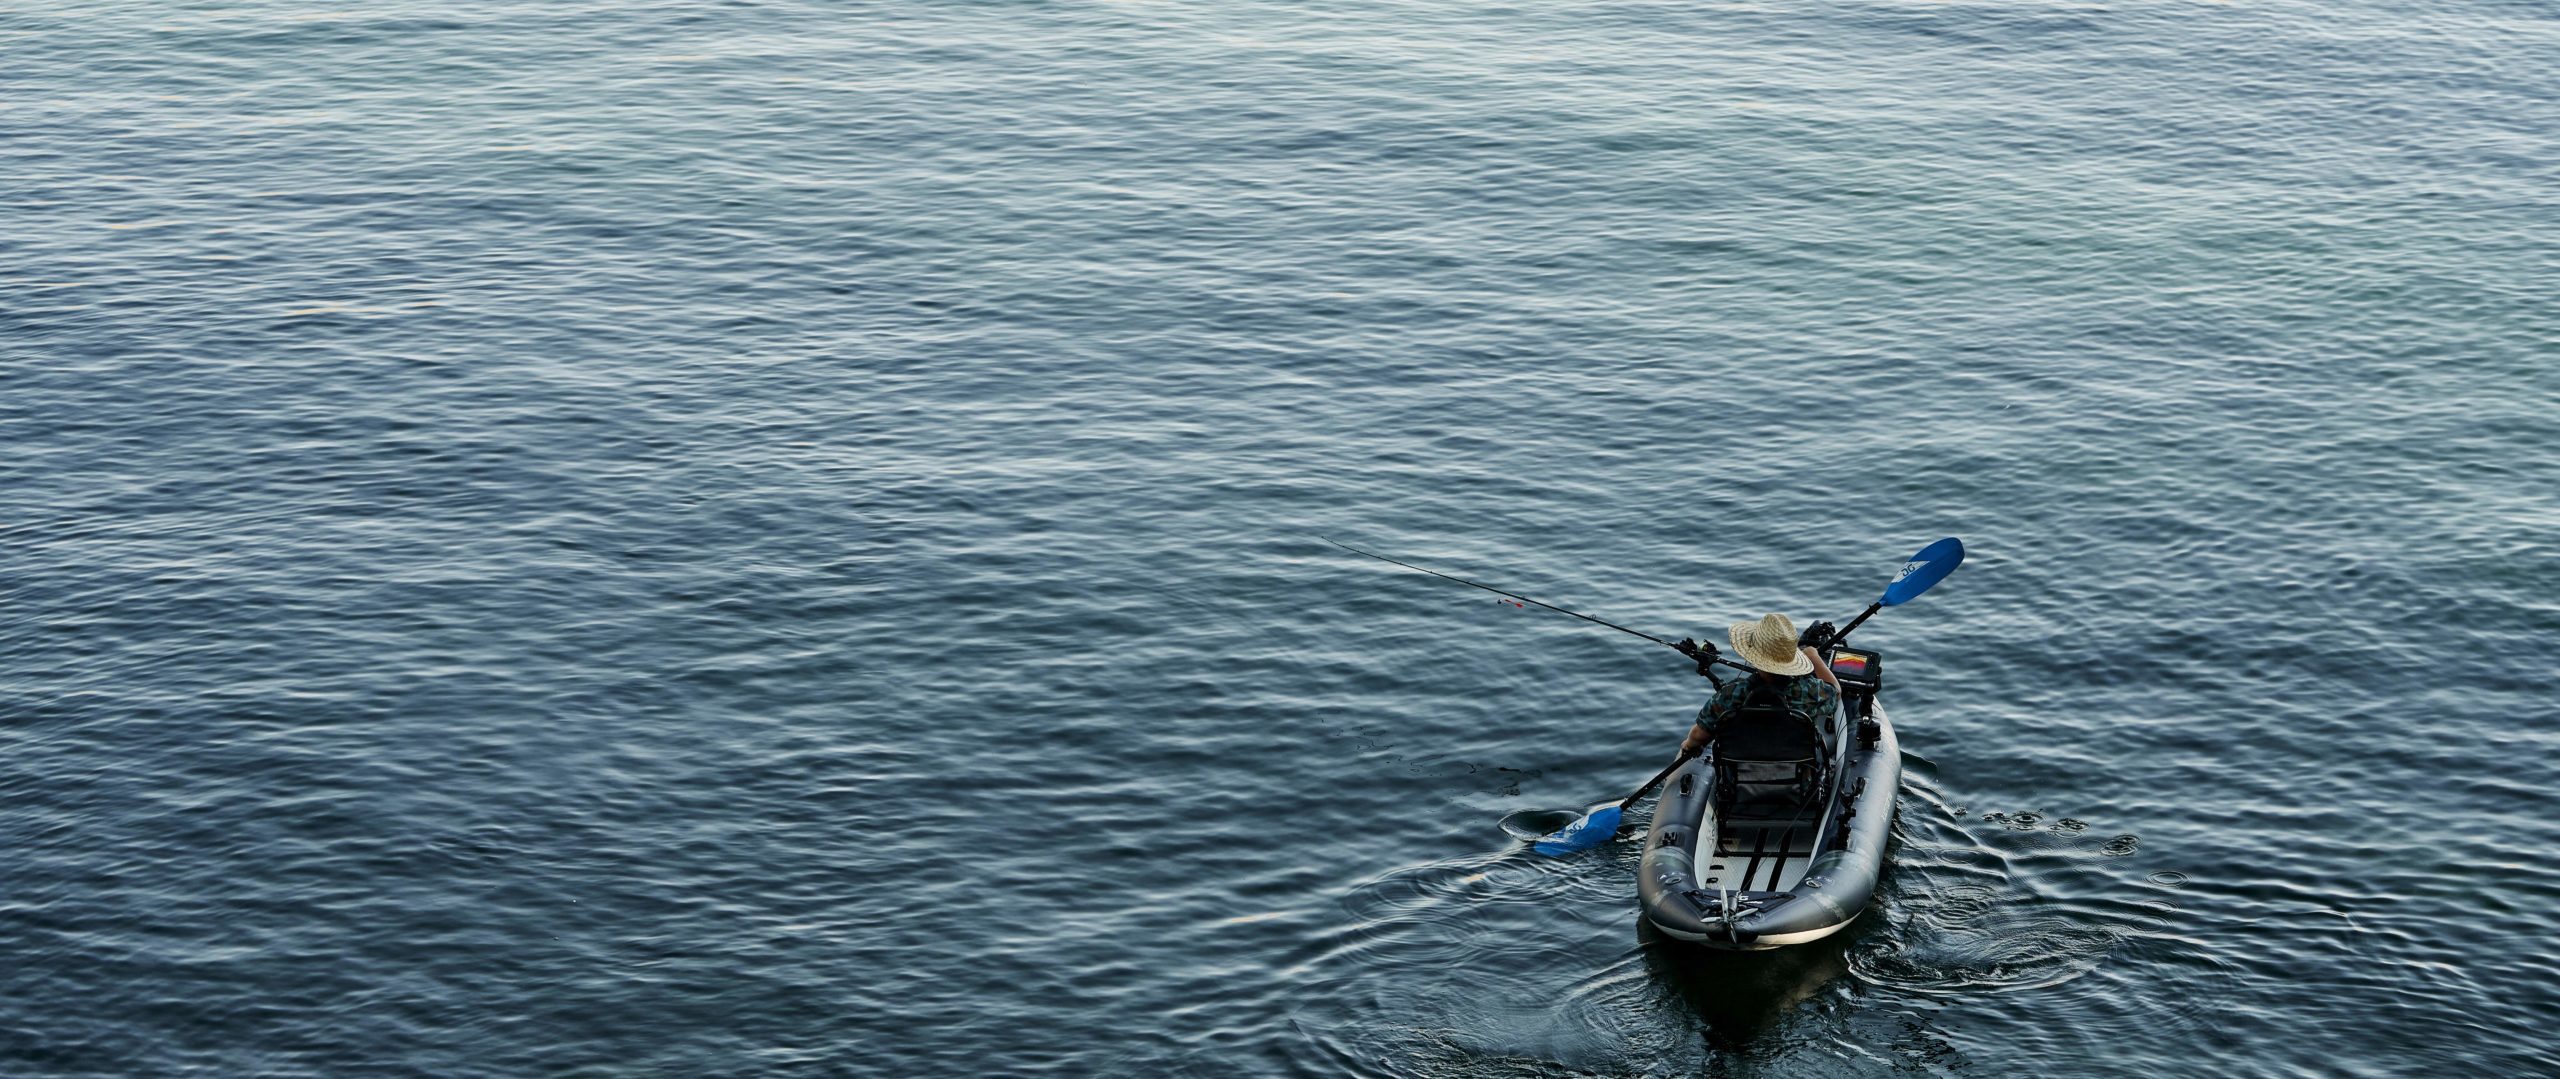 A blackfoot kayak is seen above while paddled along calm, blue water.